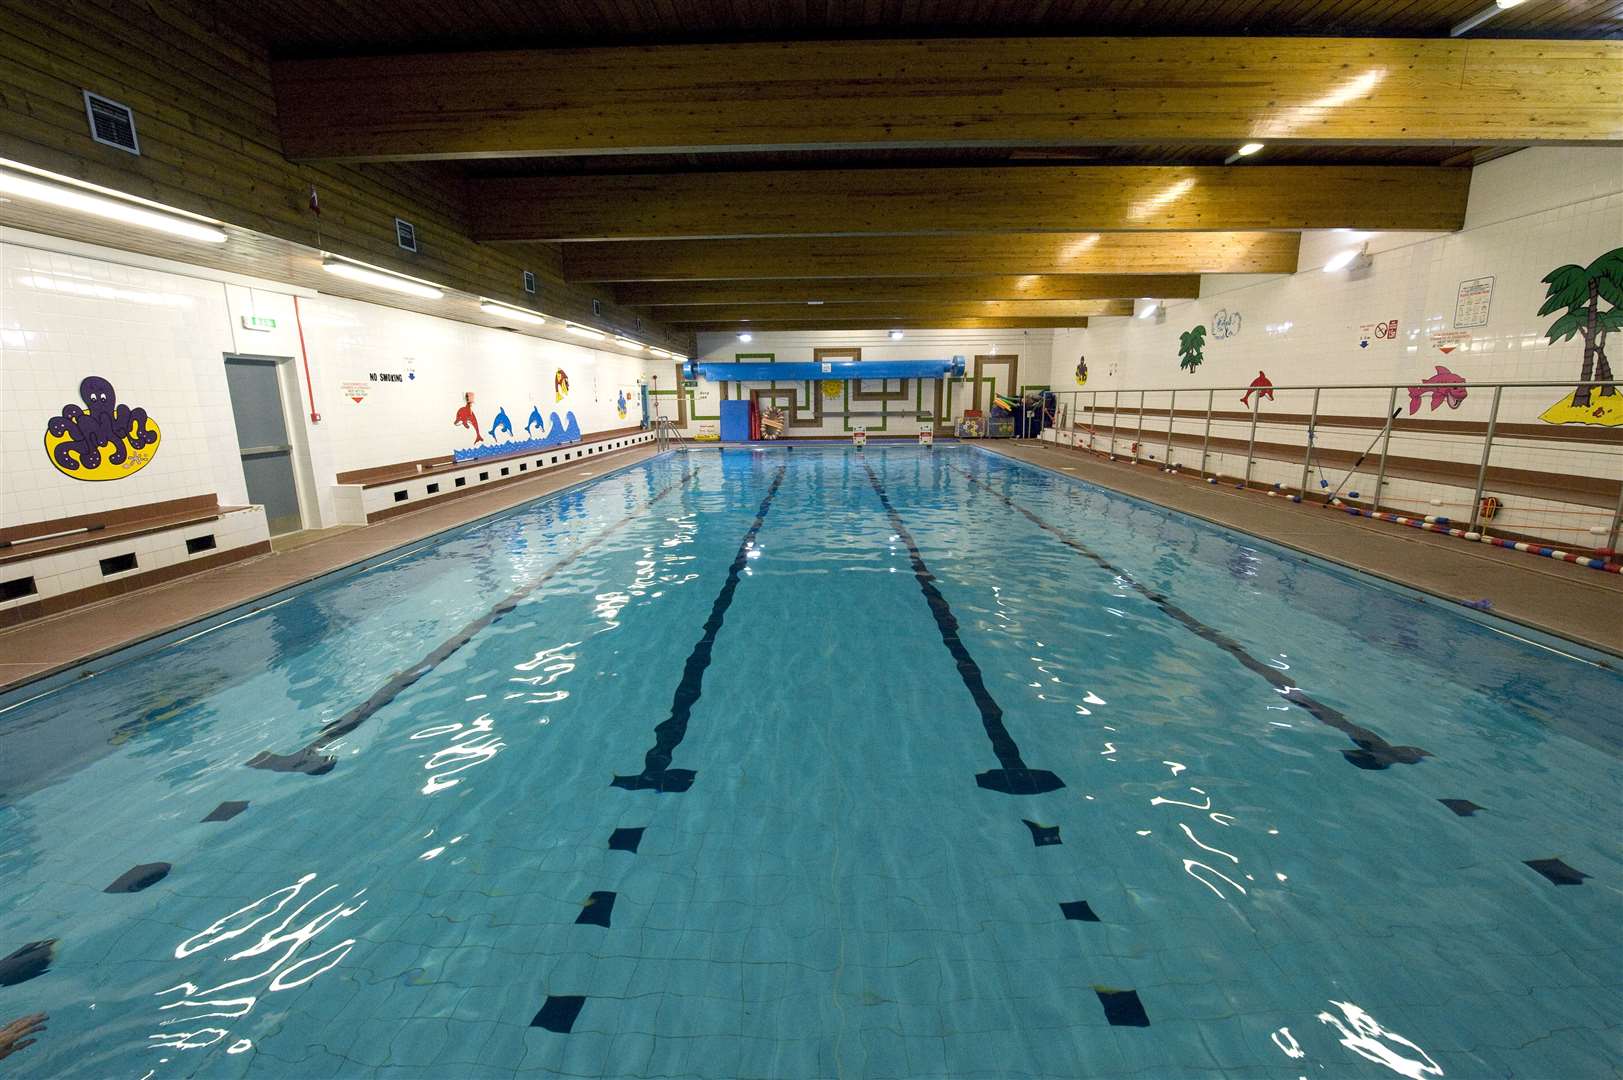 Opening hours have been cut at Turriff Swimming Pool.